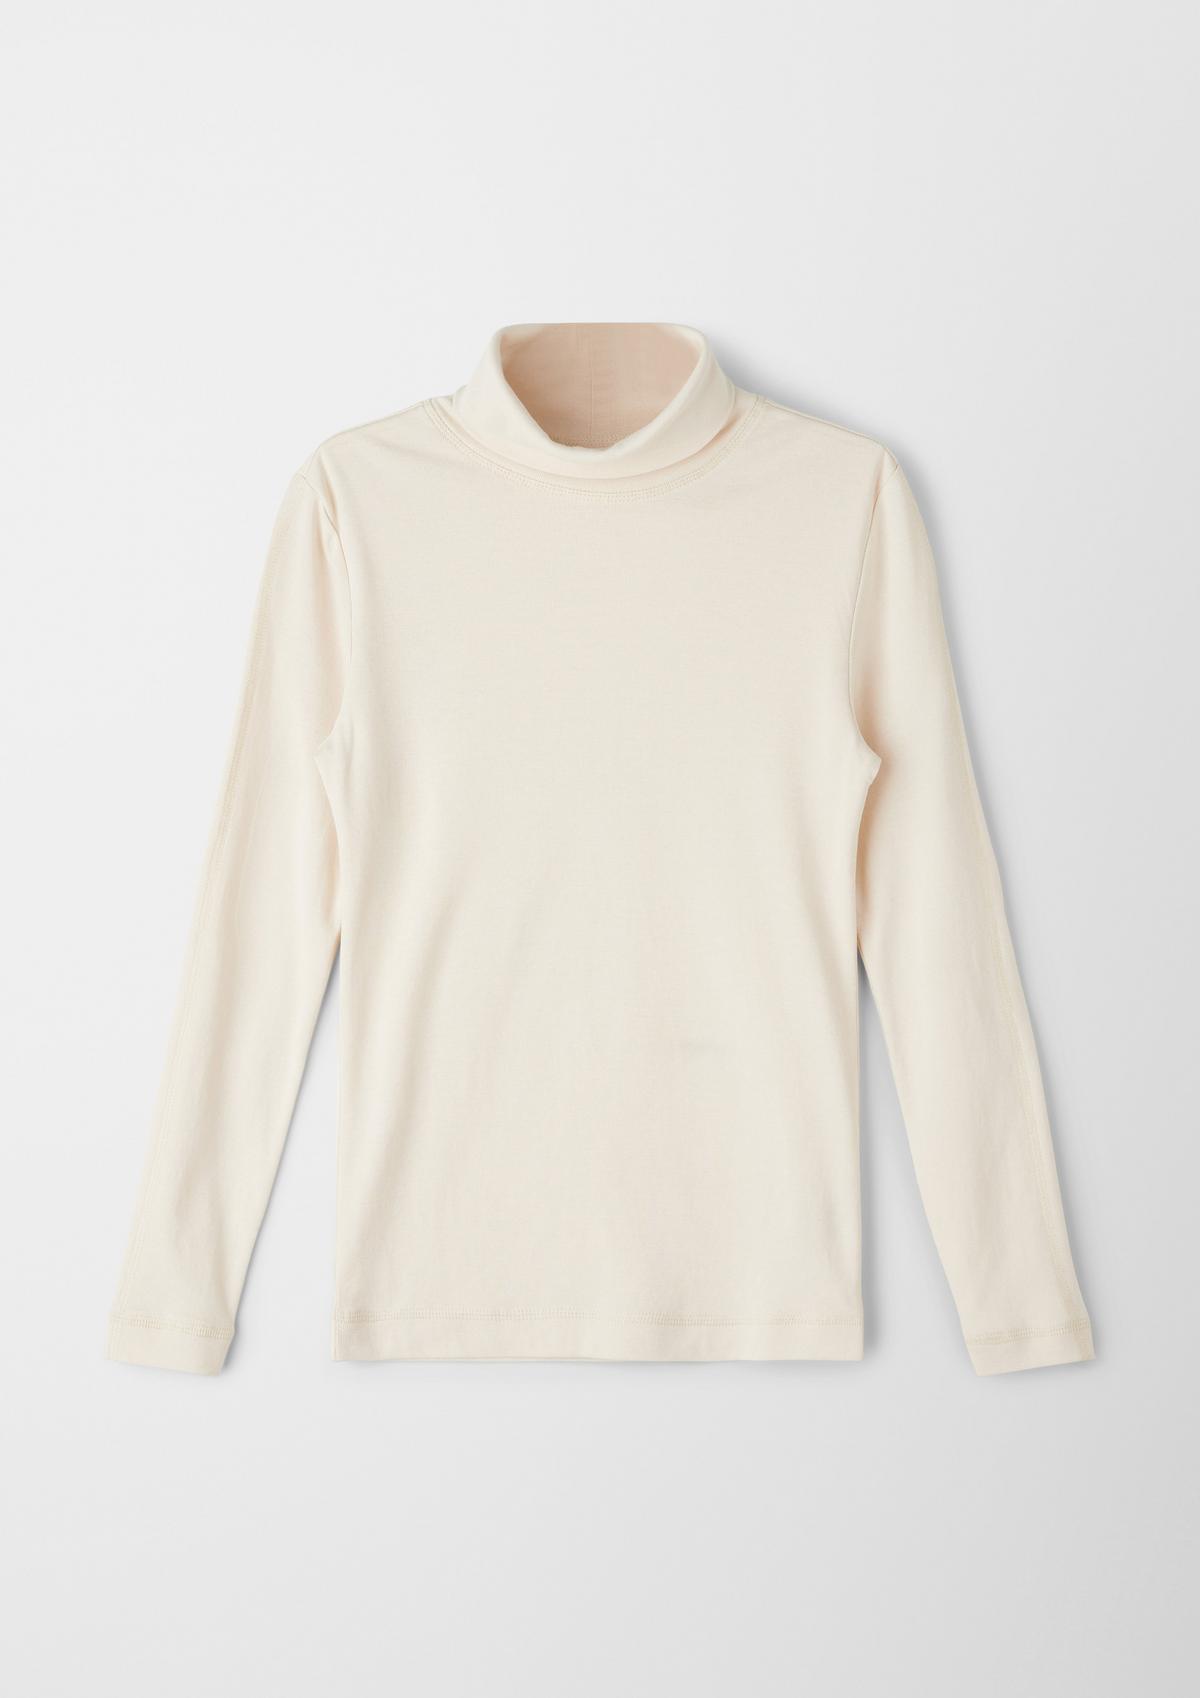 s.Oliver Long sleeve top with a turtleneck